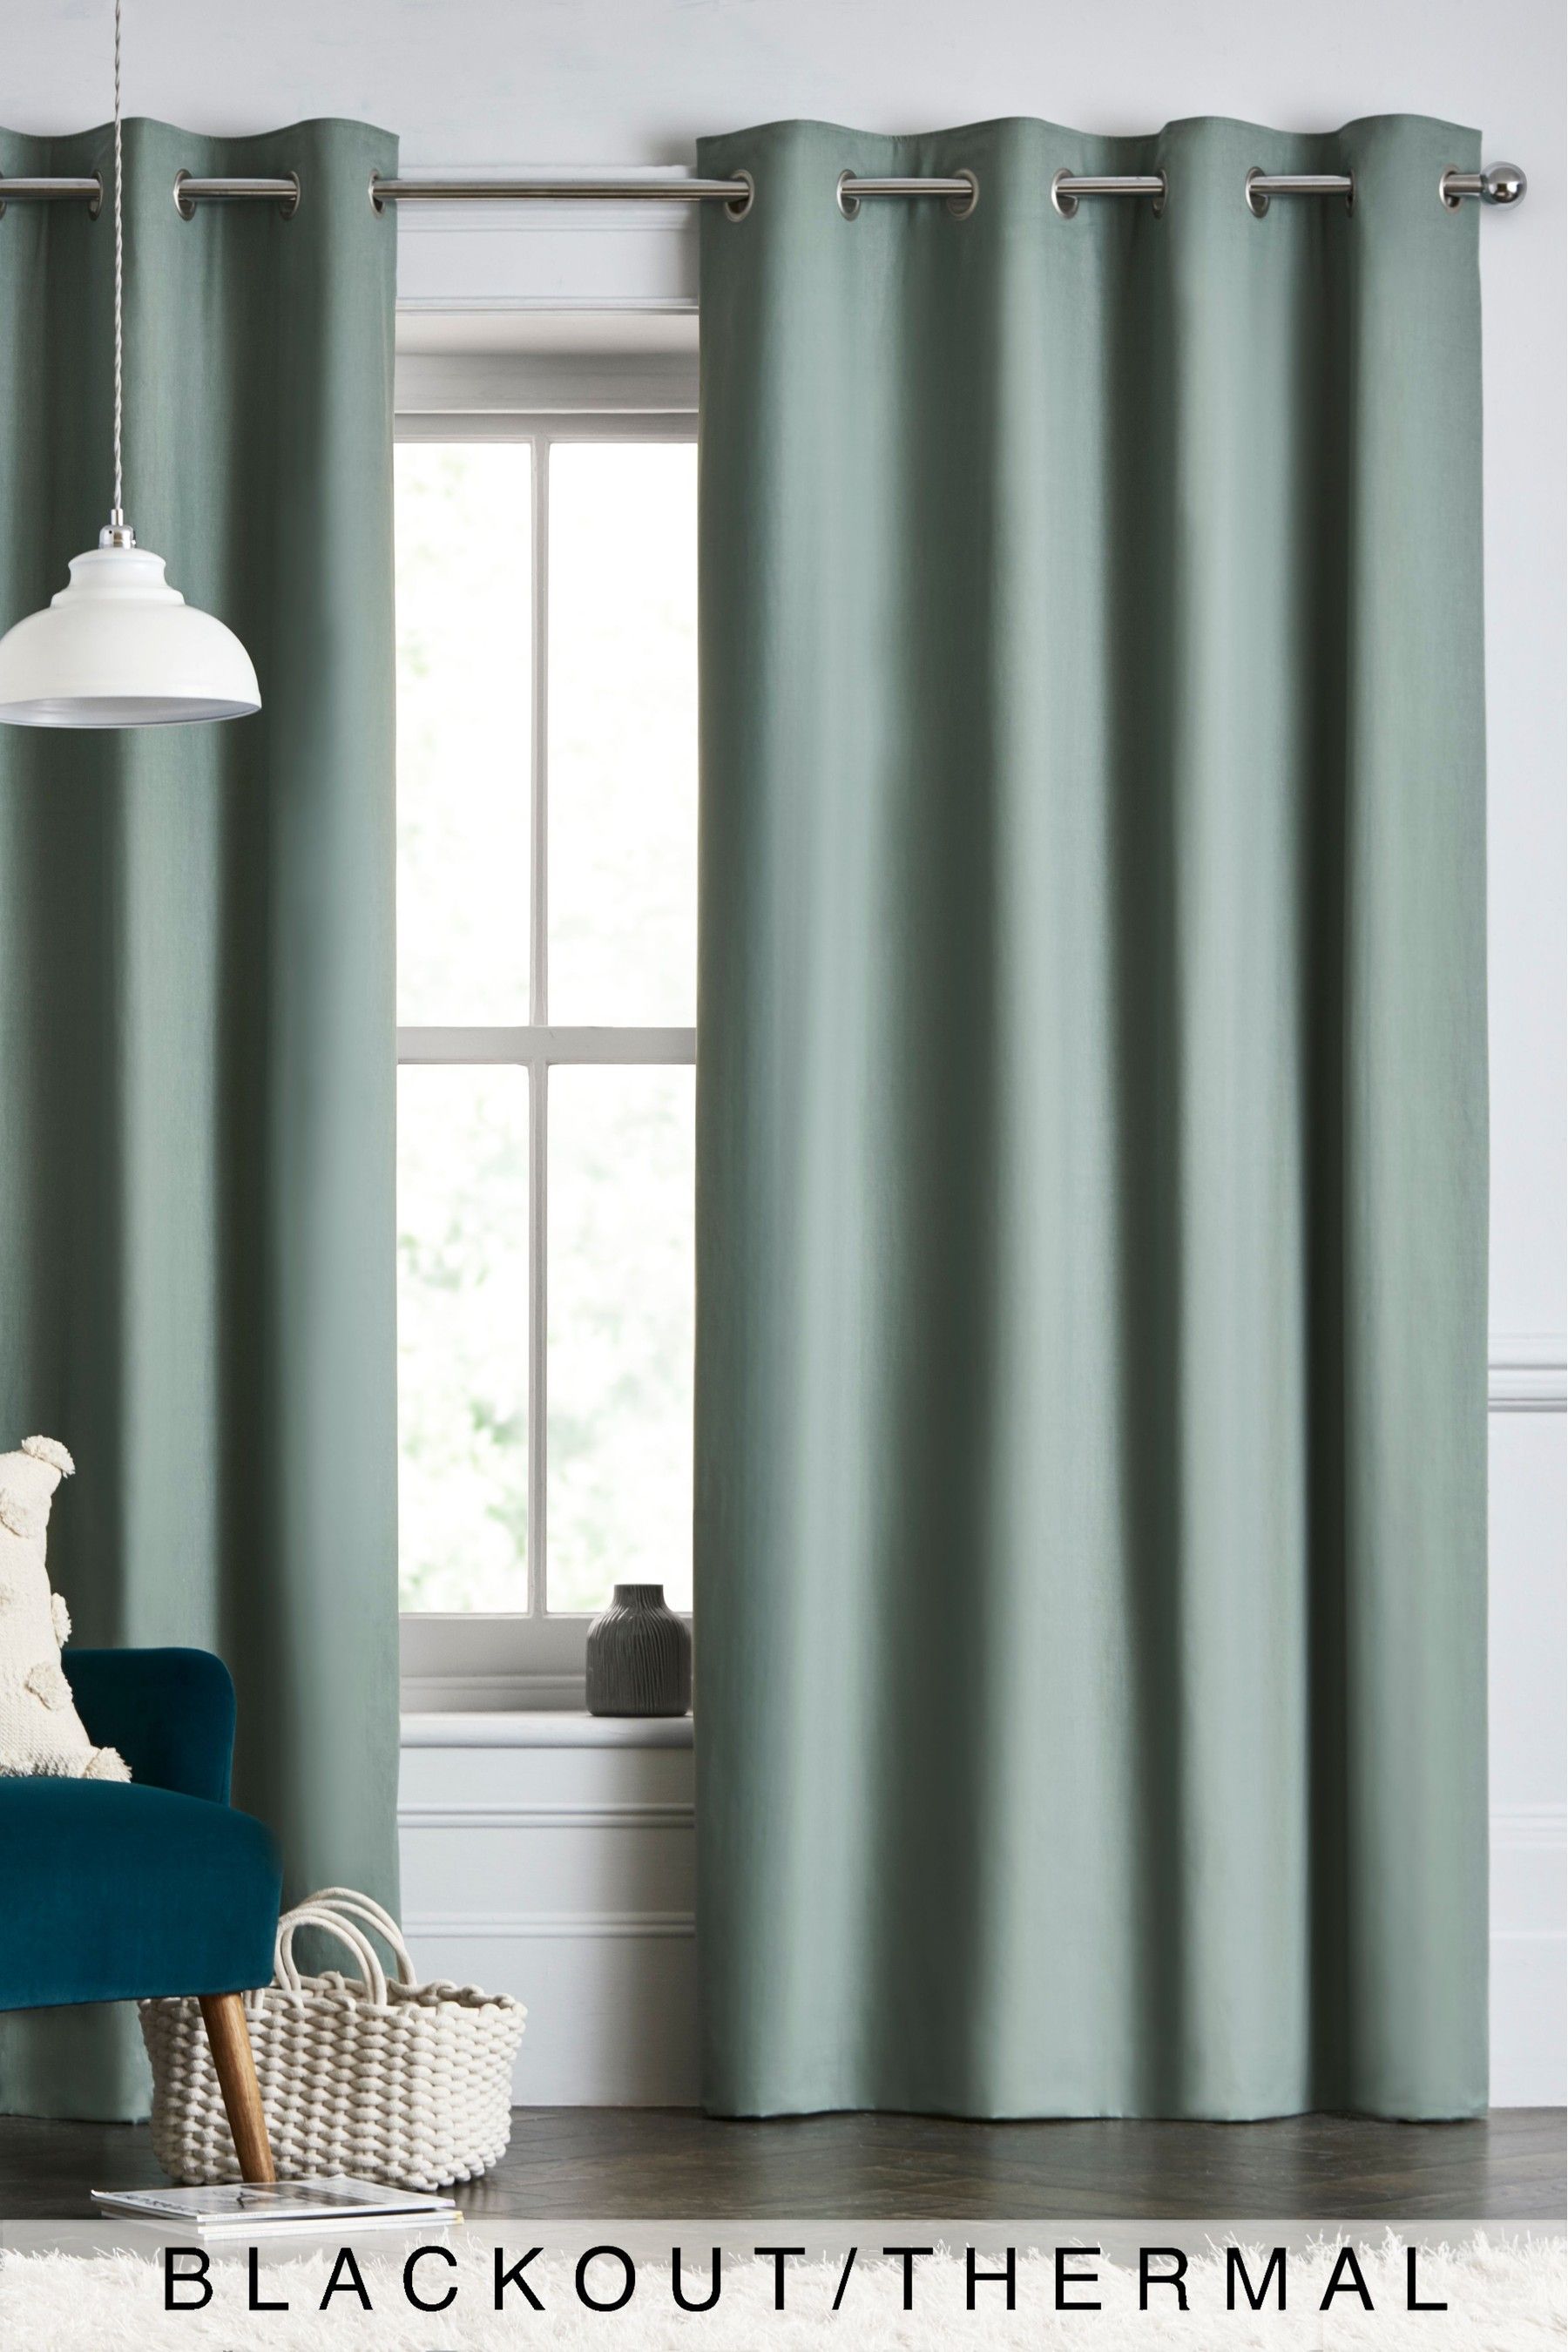 3 Layers Coating Duckegg Blue 100% Blackout-Thermal Eyelet Curtain Extra Wide Floor Window Treatment Blinds 2 panels for Bedroom,Livingroom,Kids Nursery Room W46 x L90 inch 